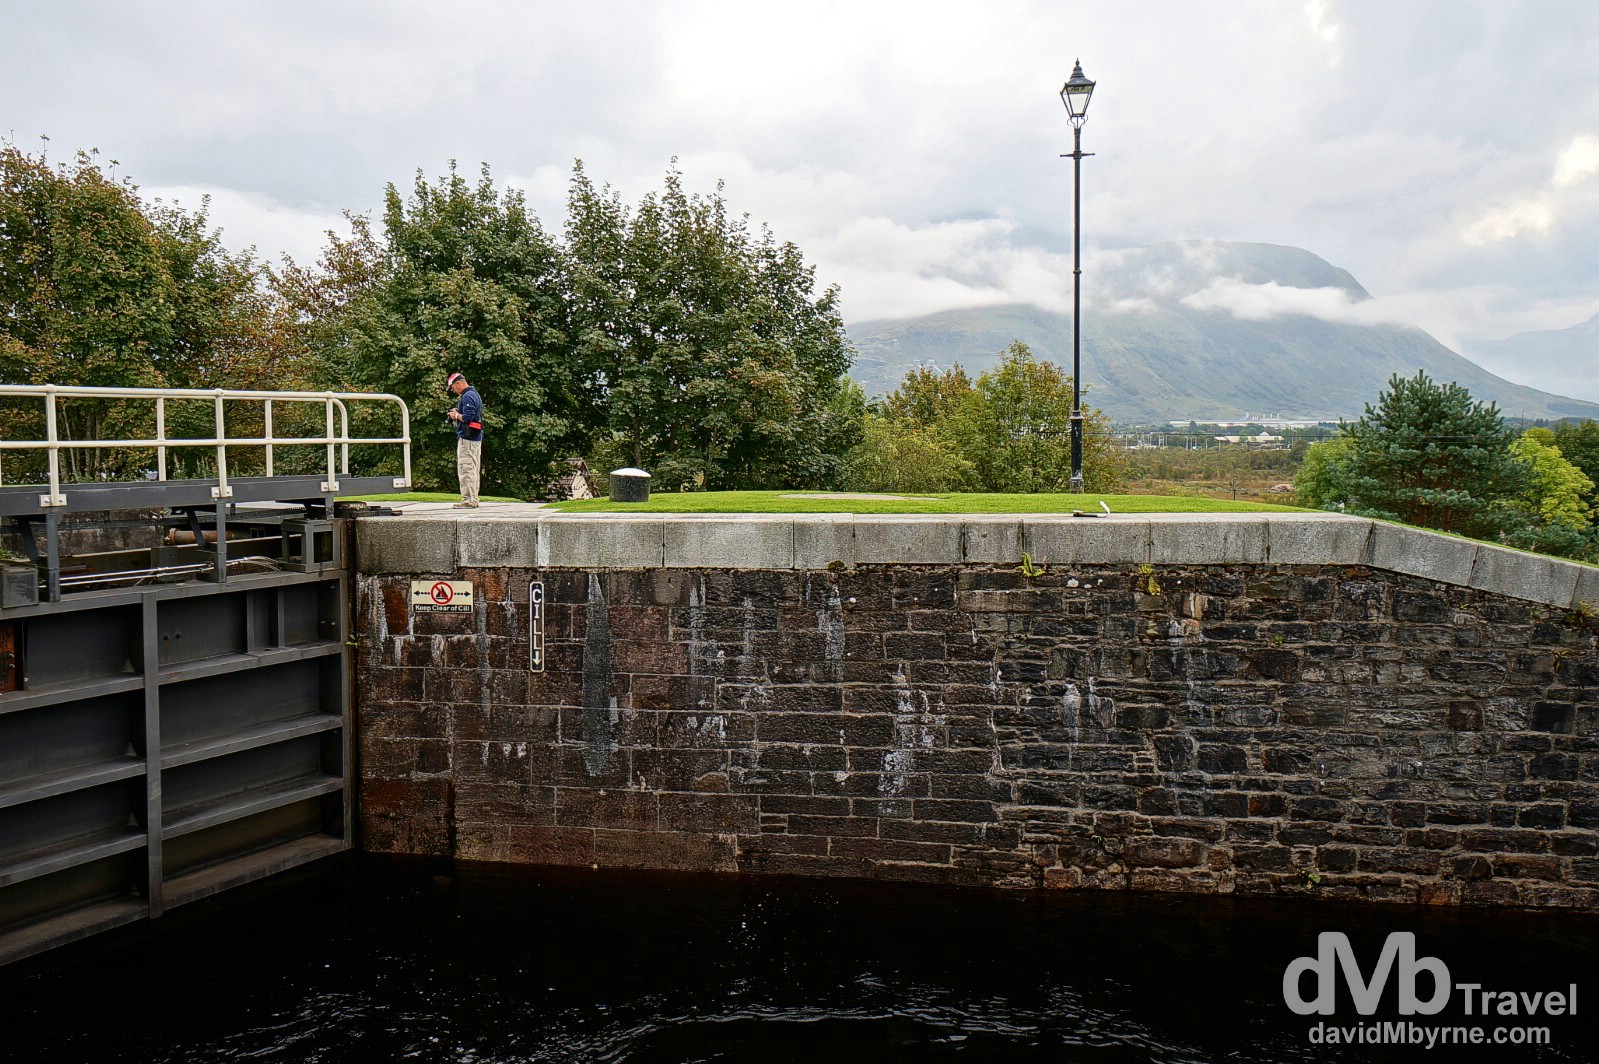 Ben Nevis, the tallest peak in the United Kingdom, as seen from the Neptune's Staircase lock of the Caledonian Canal in Banavie, Highland, Scotland. September 18, 2014. 